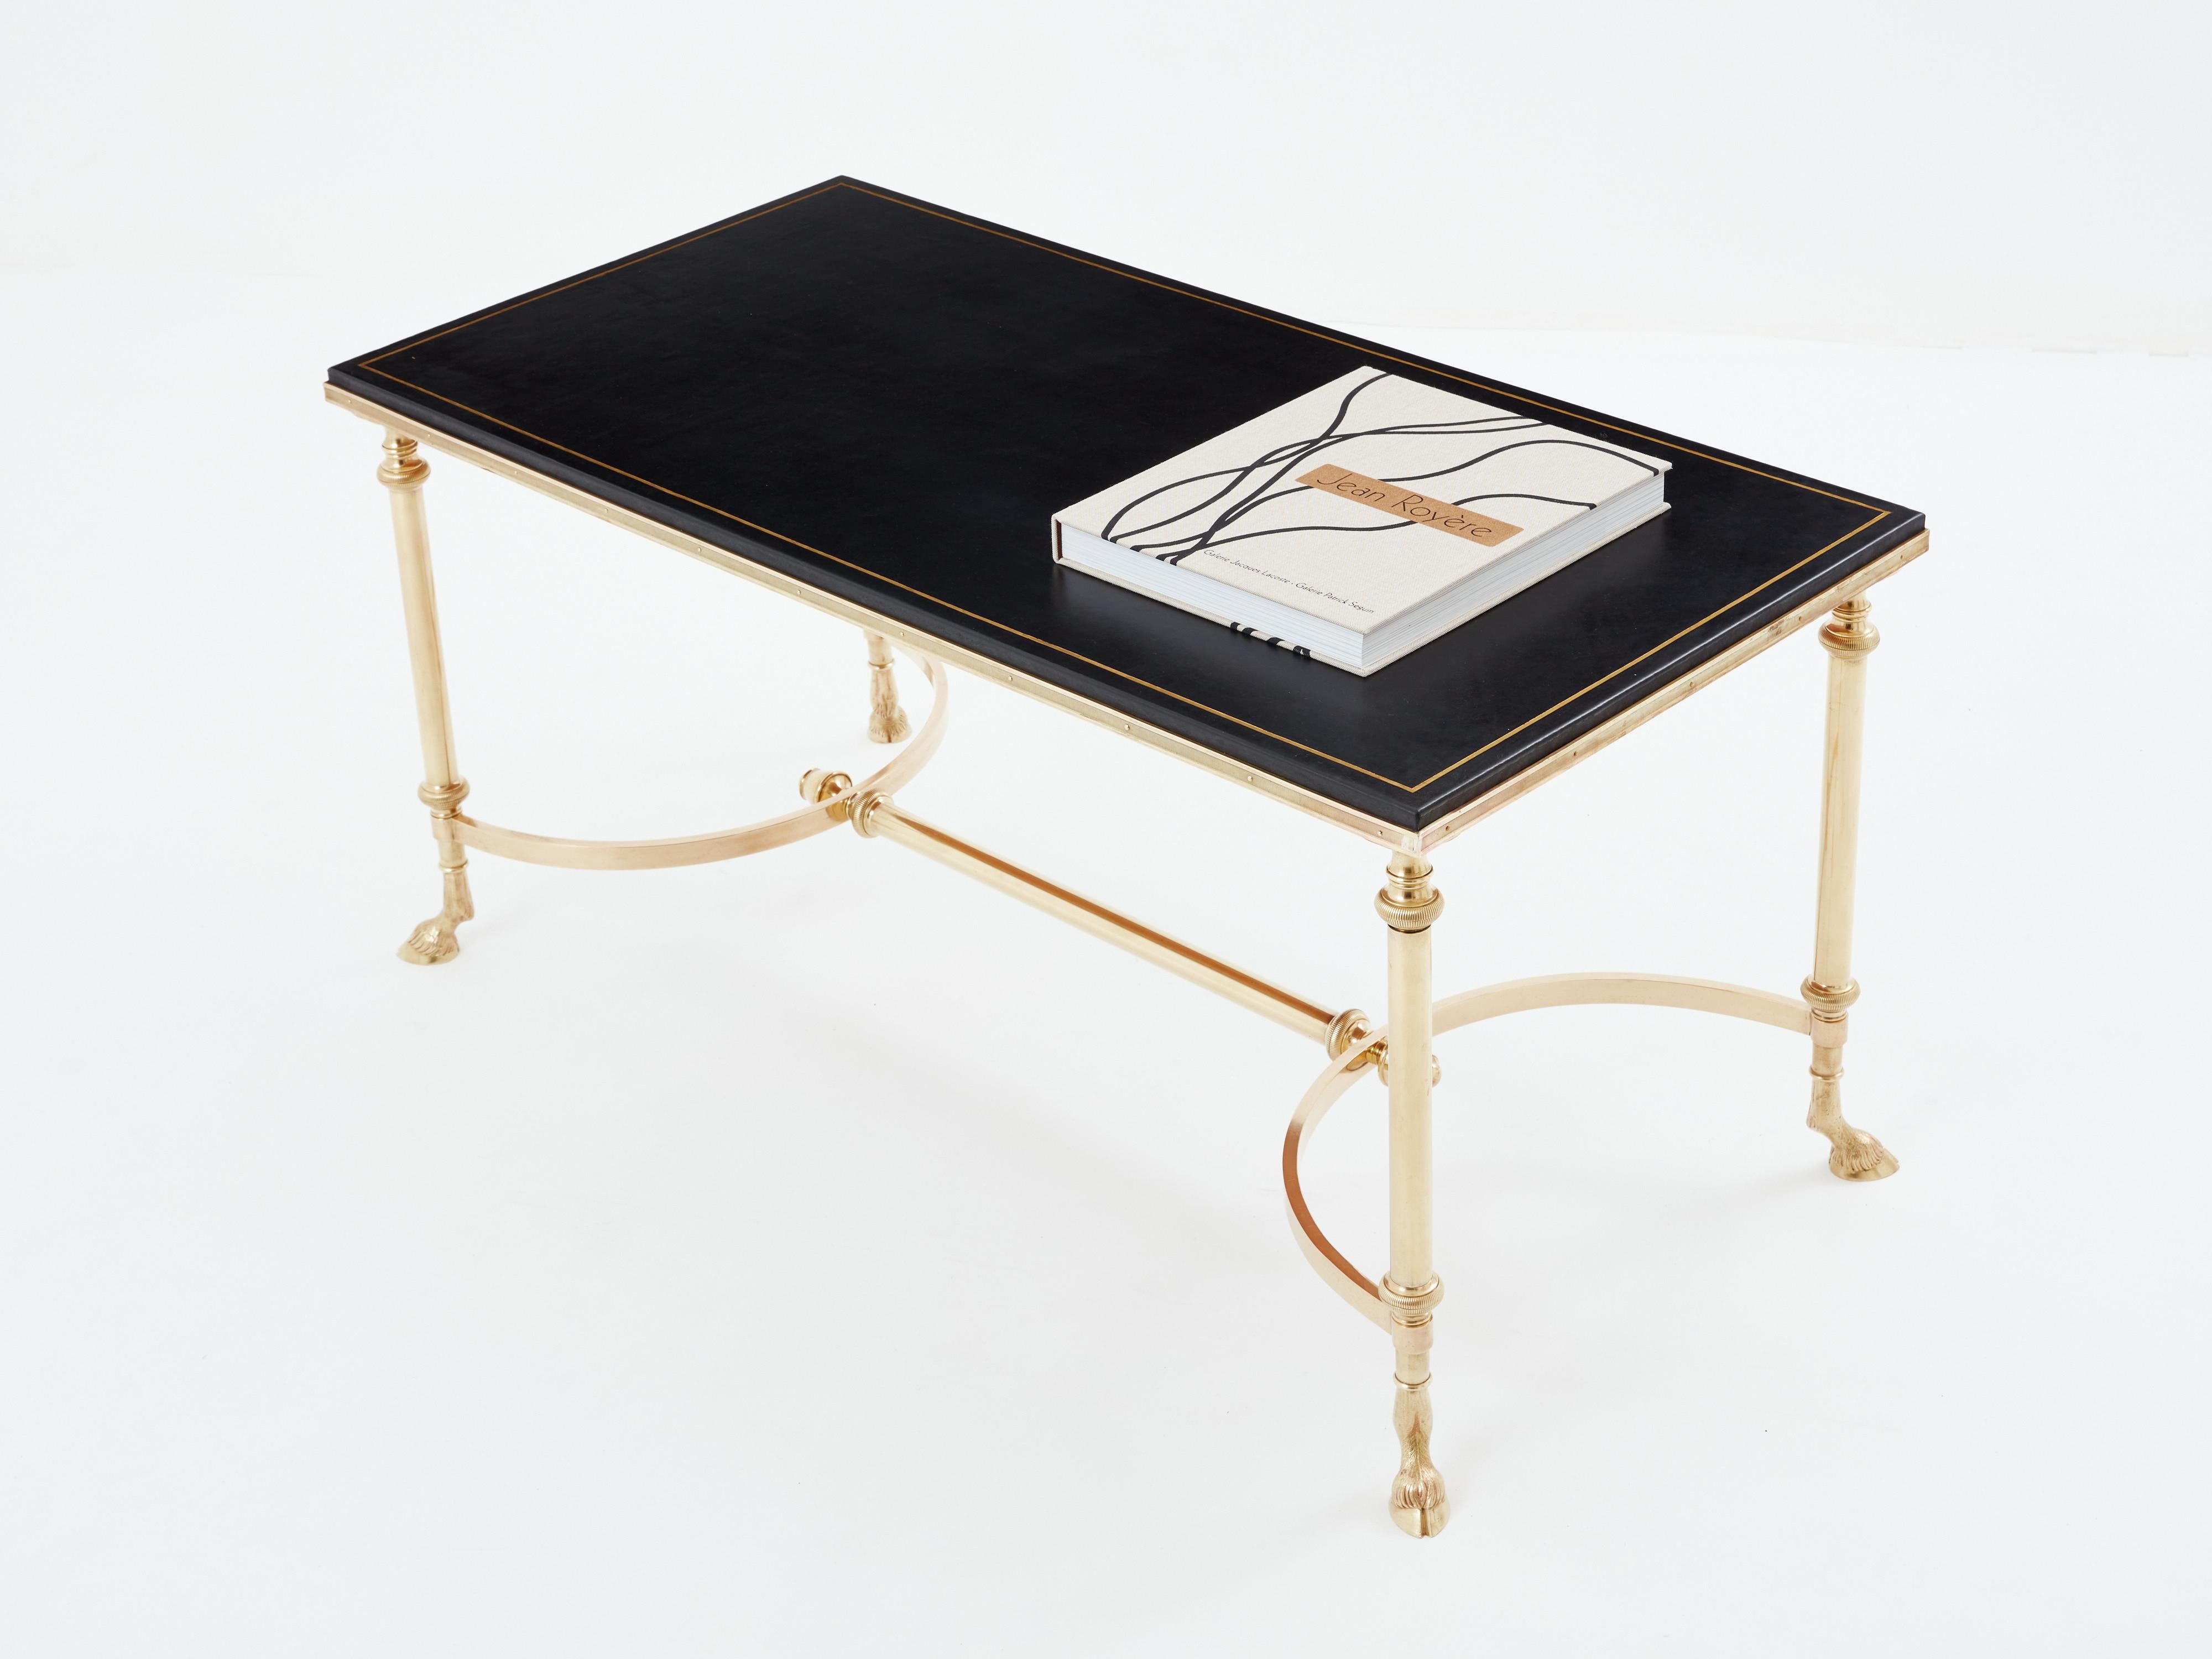 Neoclassical Revival Maison Charles neoclassical coffee table brass black leather 1970s For Sale